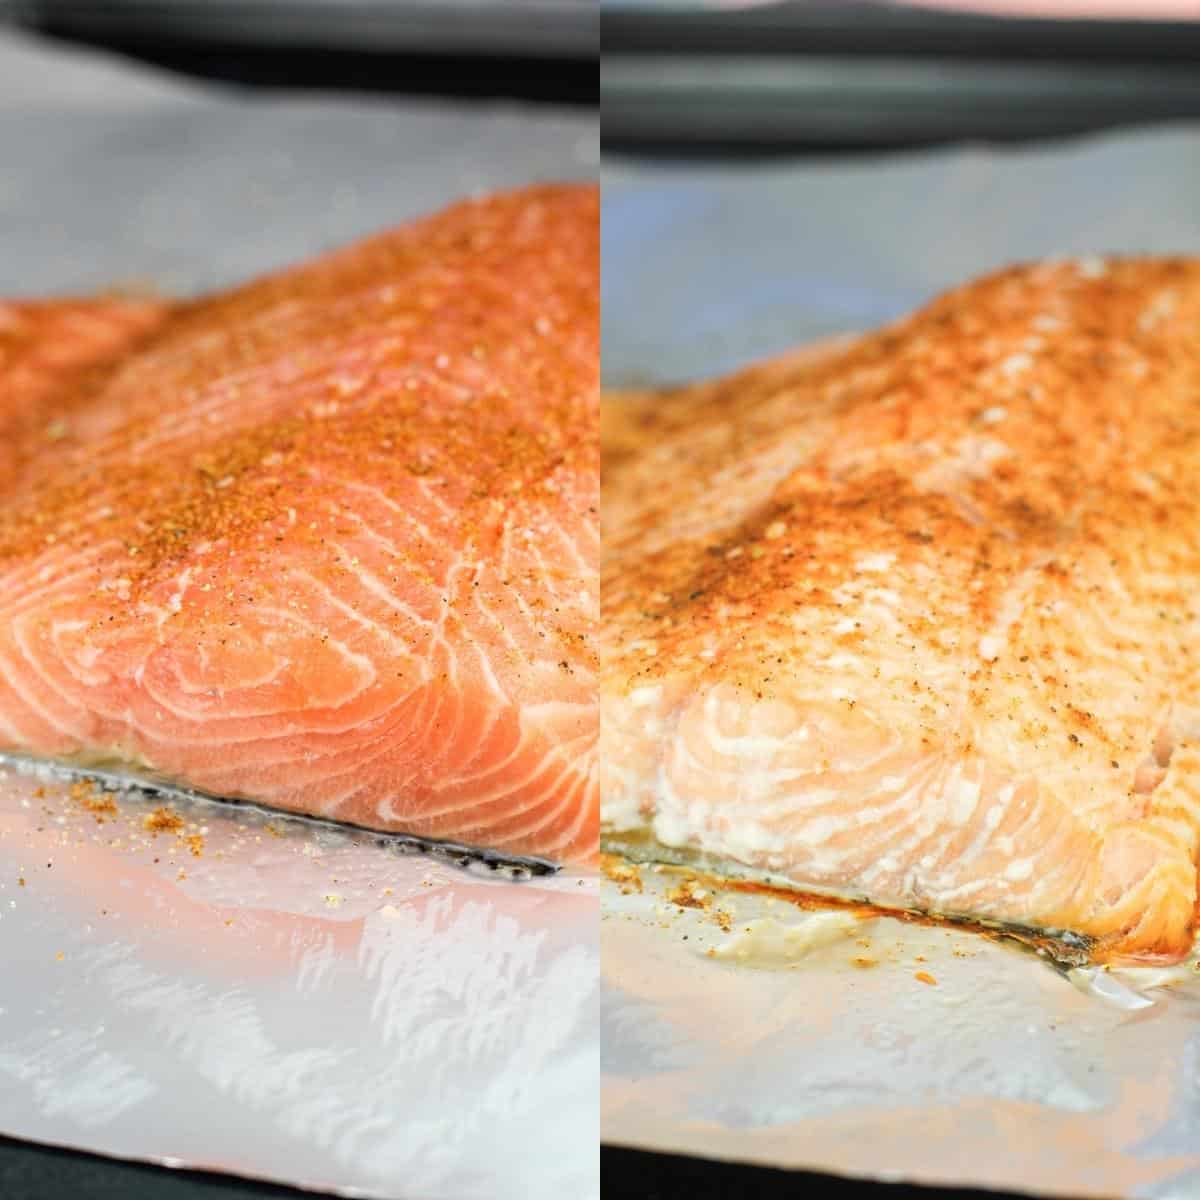 collage of 2 photos: left, raw salmon on foil; right, cooked salmon on foil